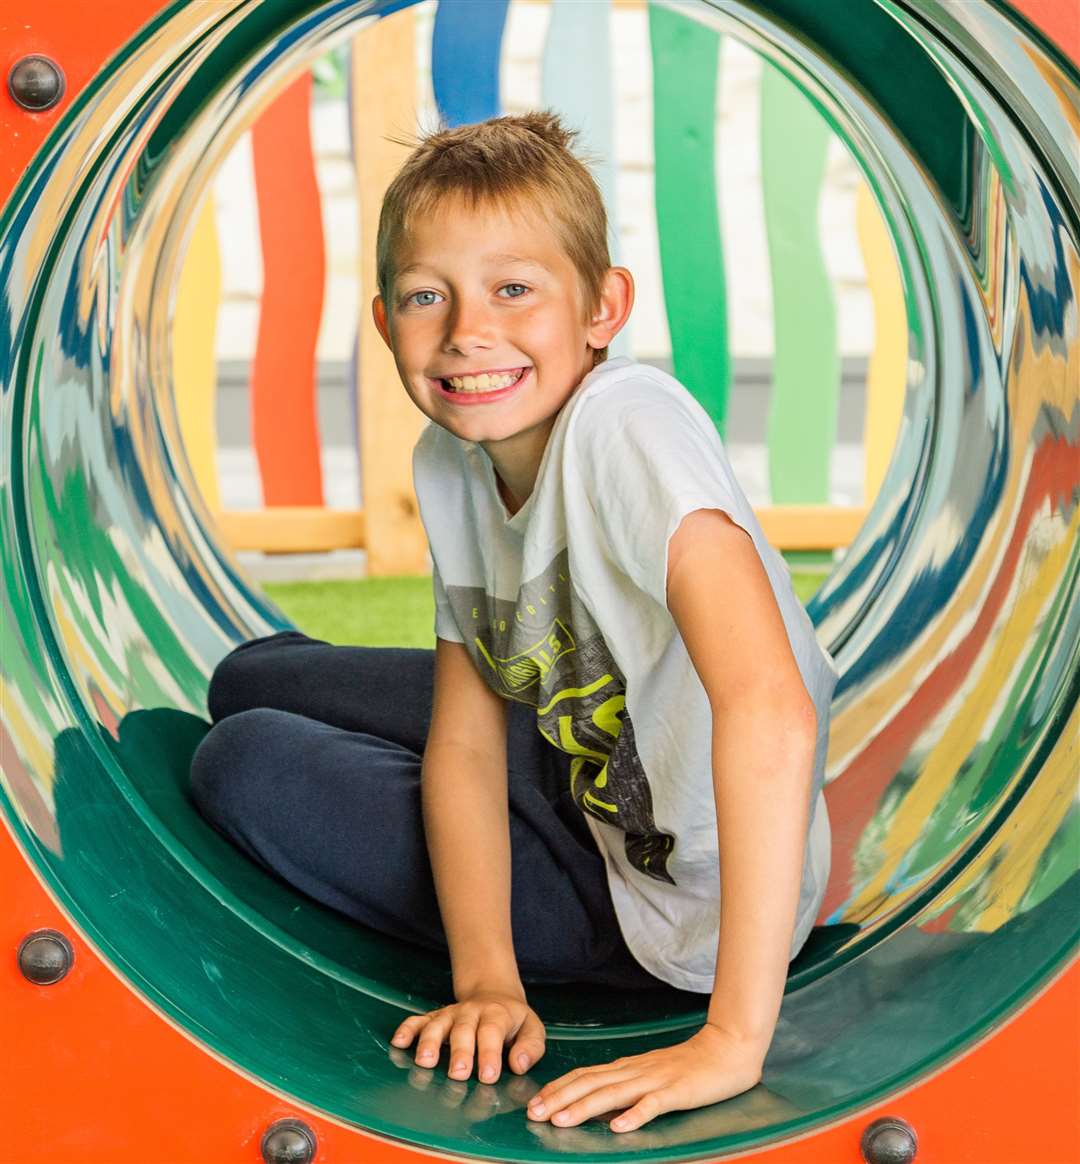 The play area includes climbing frames, a slide and interactive elements.